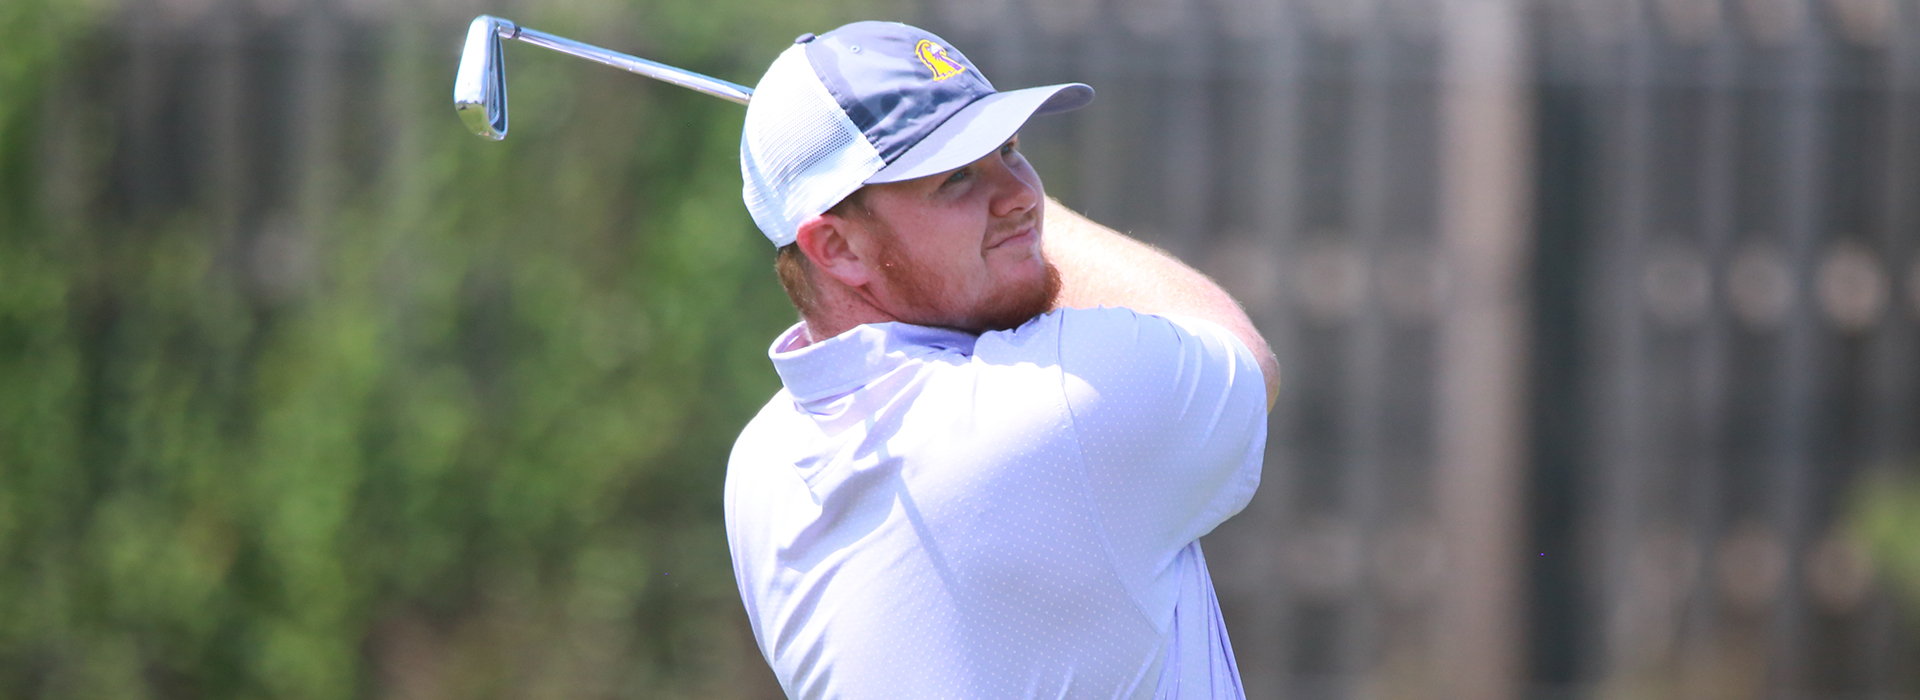 Golden Eagles second after rain-shortened first day of Big Blue Intercollegiate